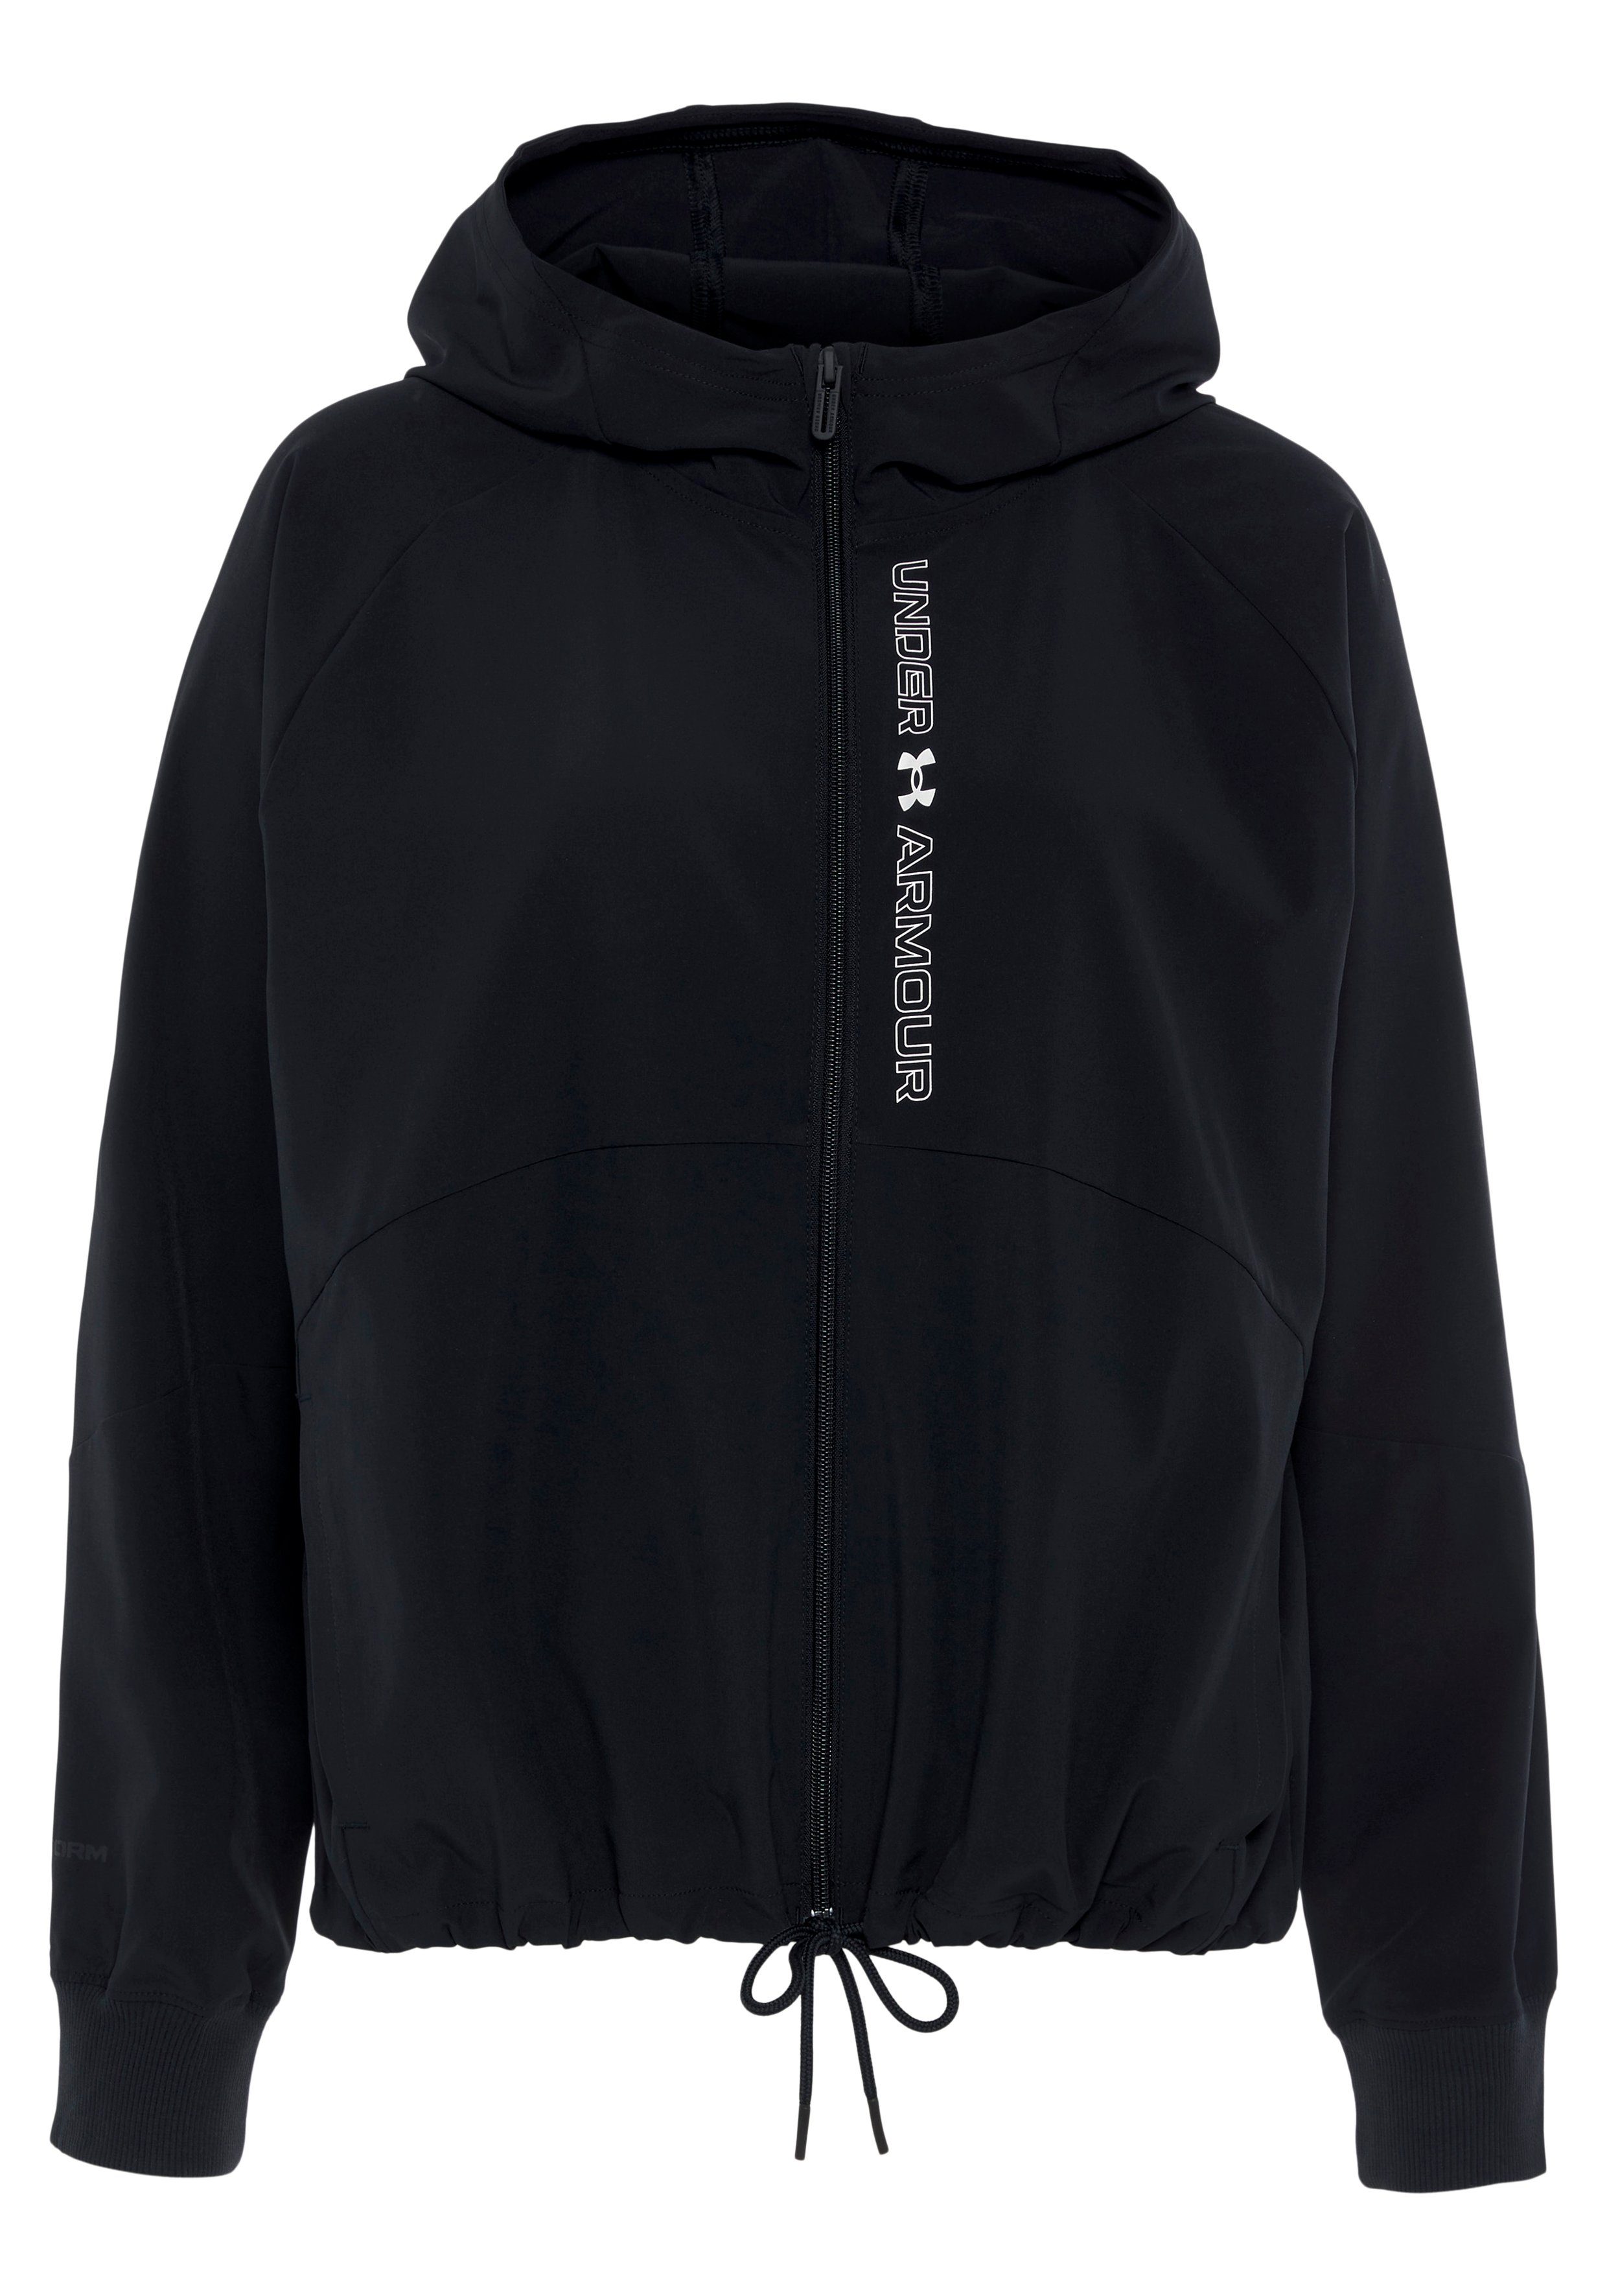 Material Windbreaker FZ WOVEN stretchiges Gewebtes, Under Armour® JACKET,